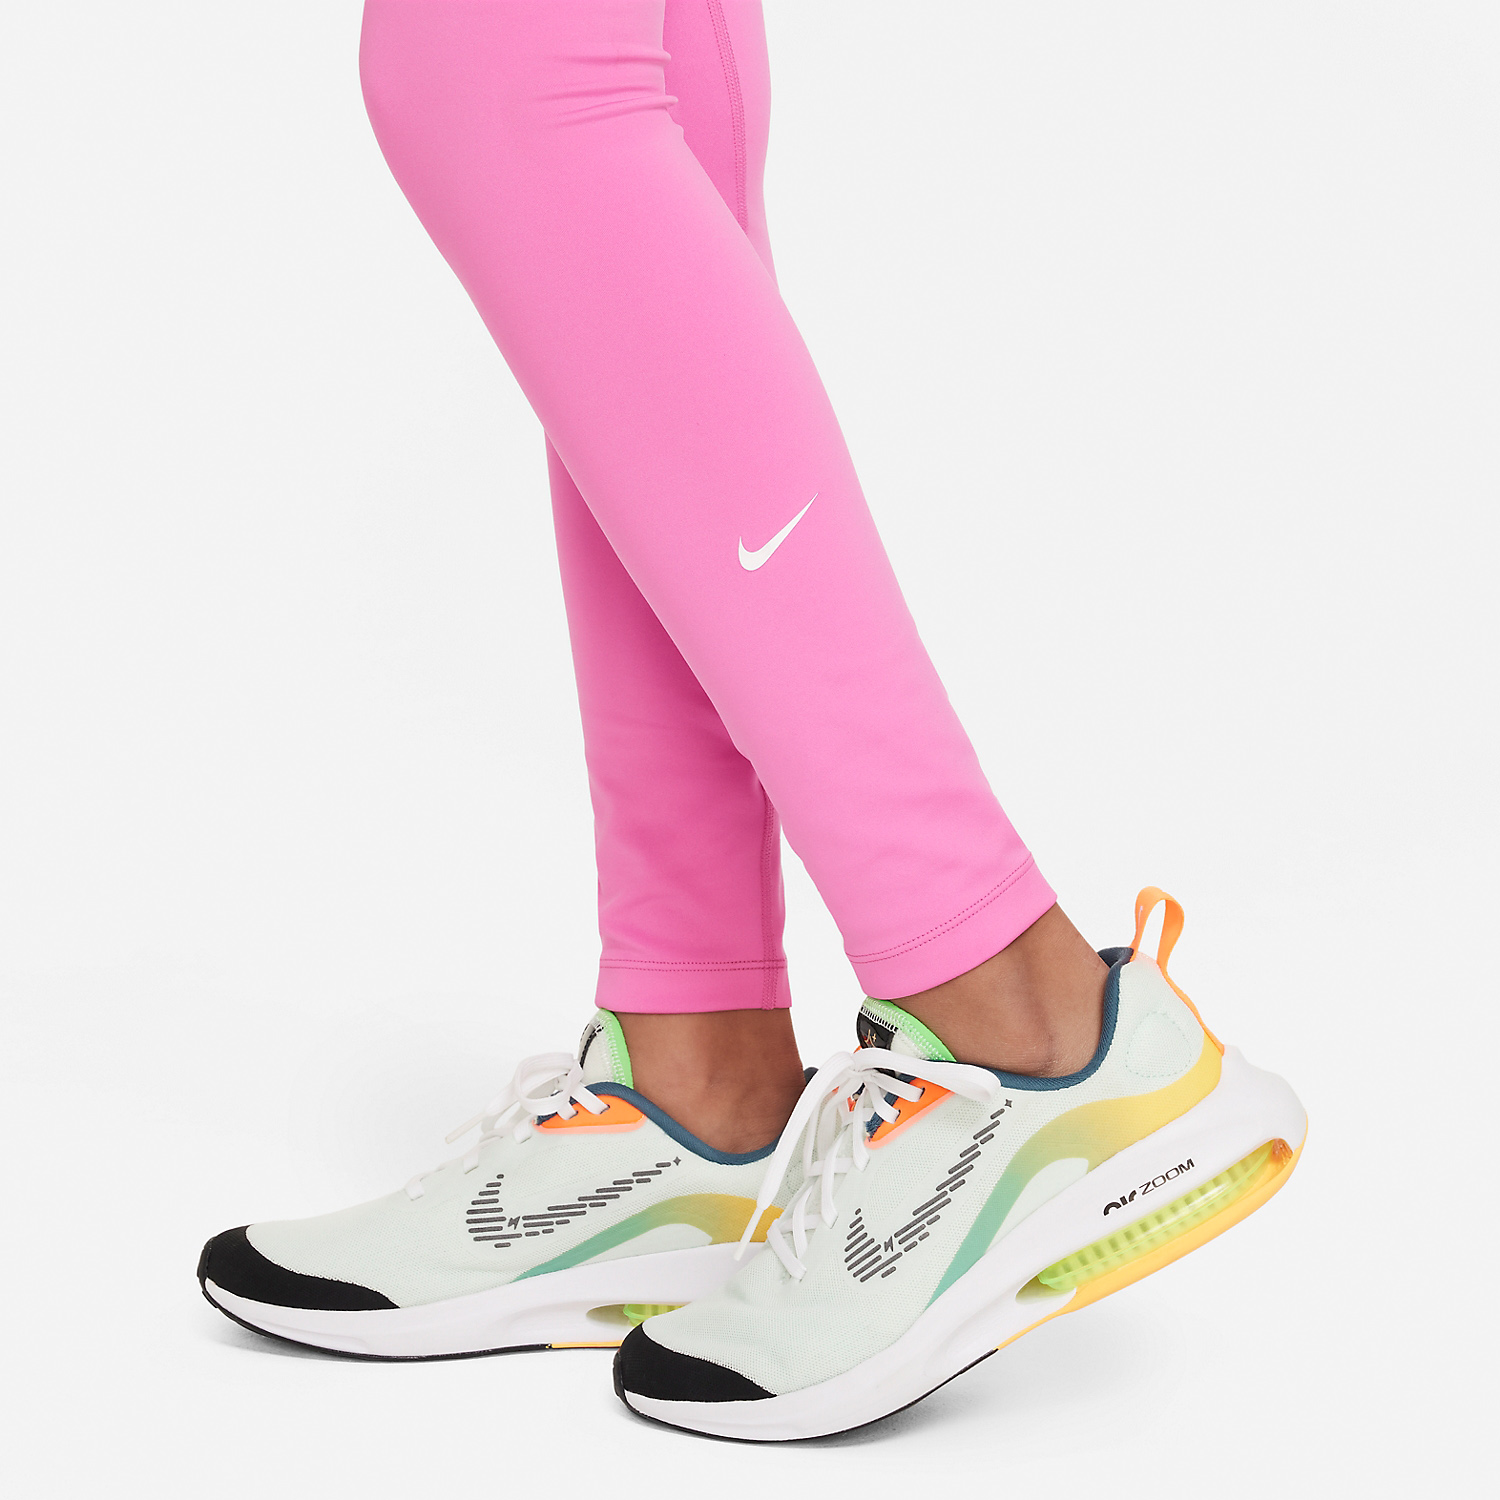 Nike Dri-FIT One Tights Girl - Playful Pink/White